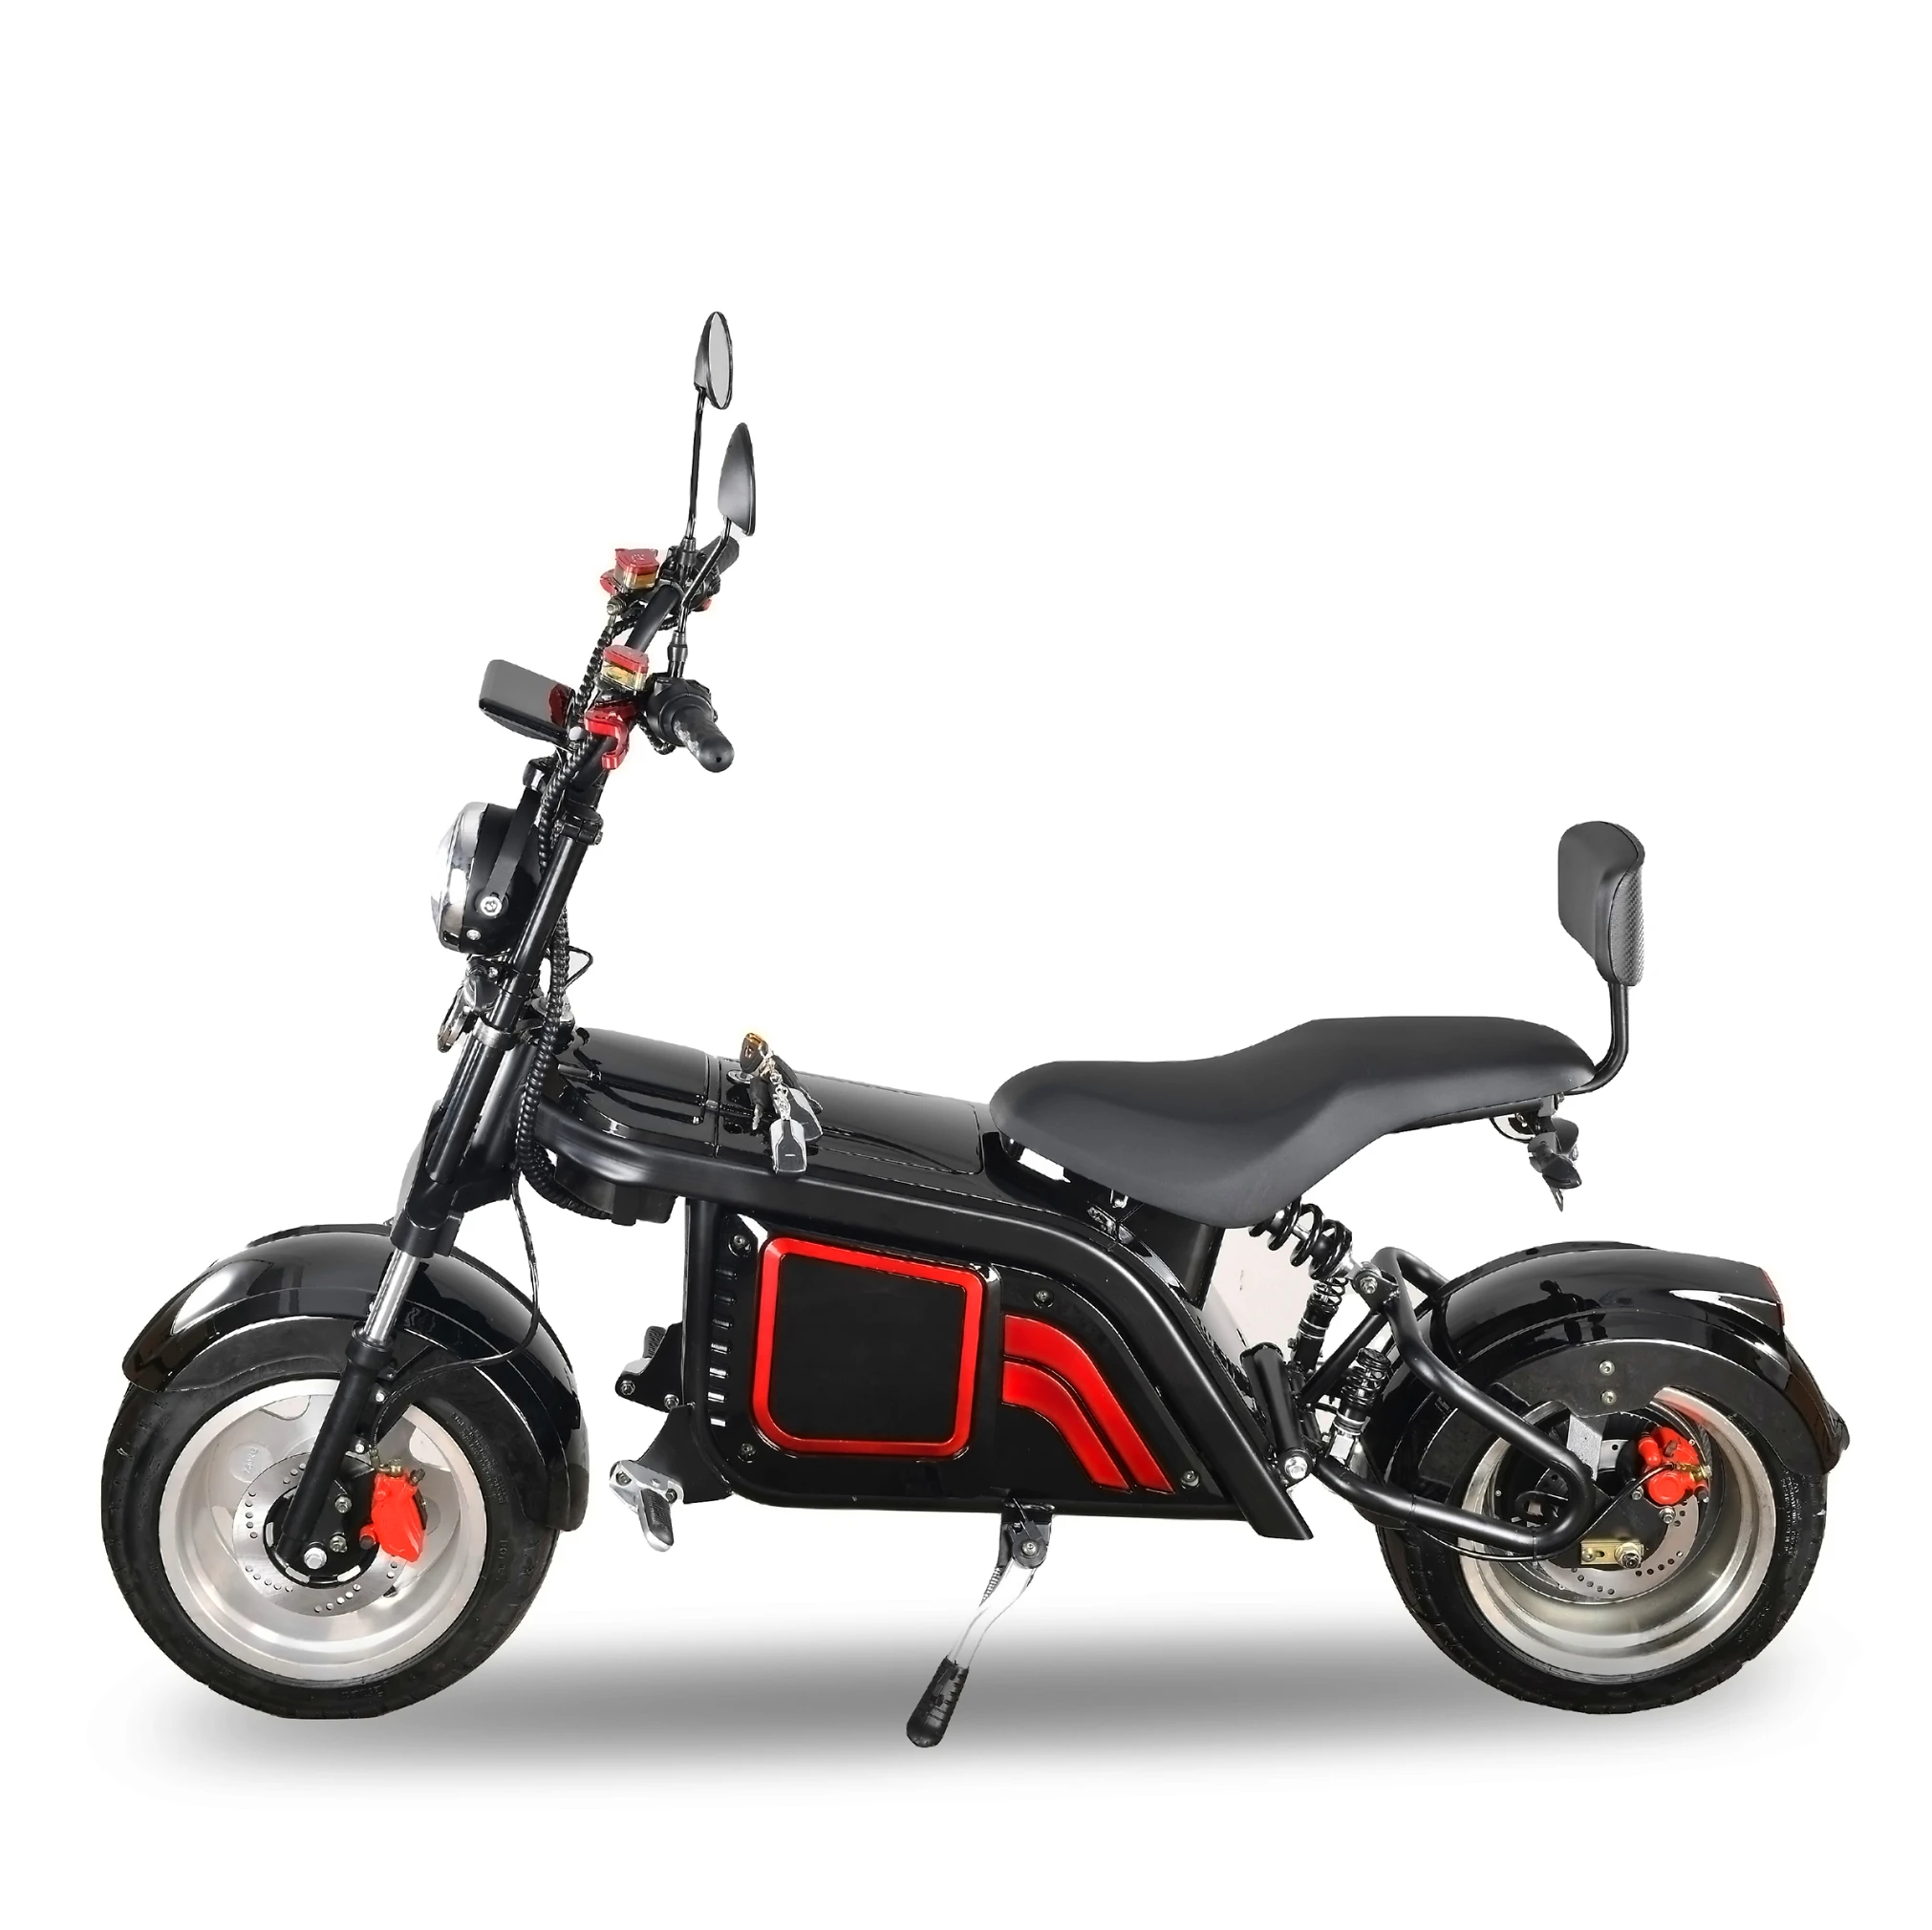 Holland Warehouse SF CITYCOCO Foldable 2 Wheel Electric Scooter 3 Wheel Fat Tire City Coco, Blue red black